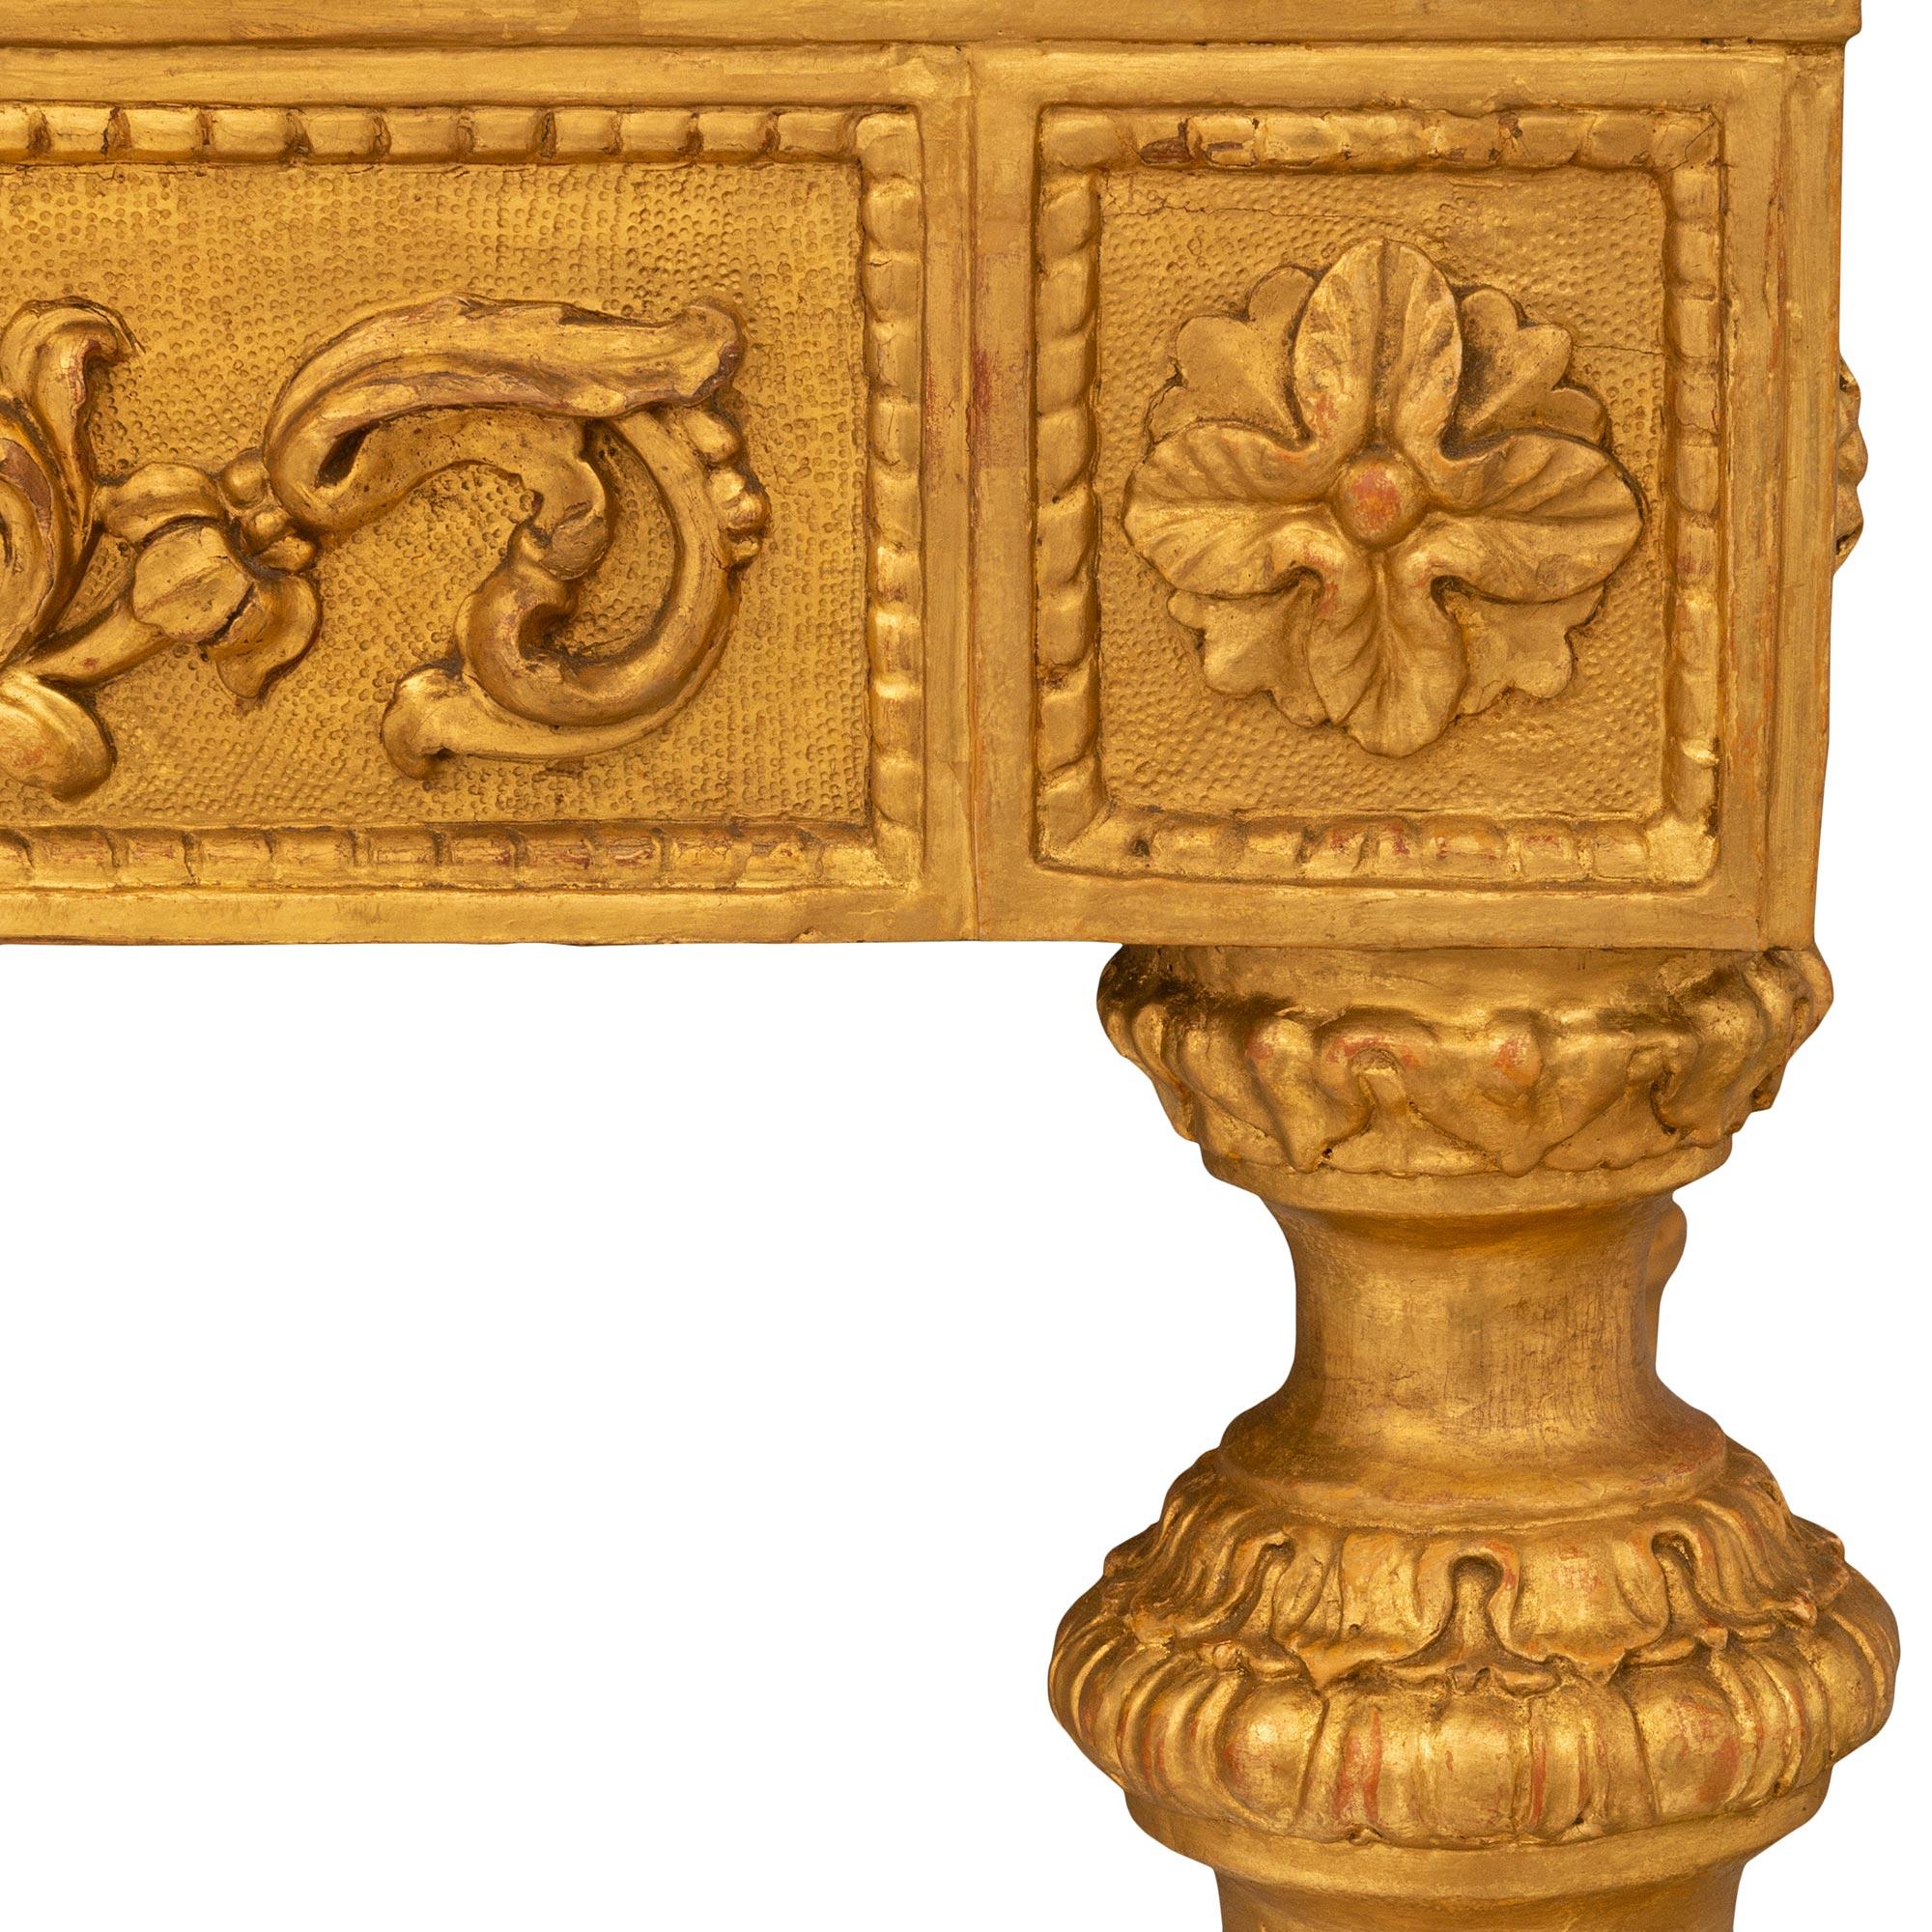 Italian 18th Century Louis XVI Period Giltwood & Marble Freestanding Console For Sale 3